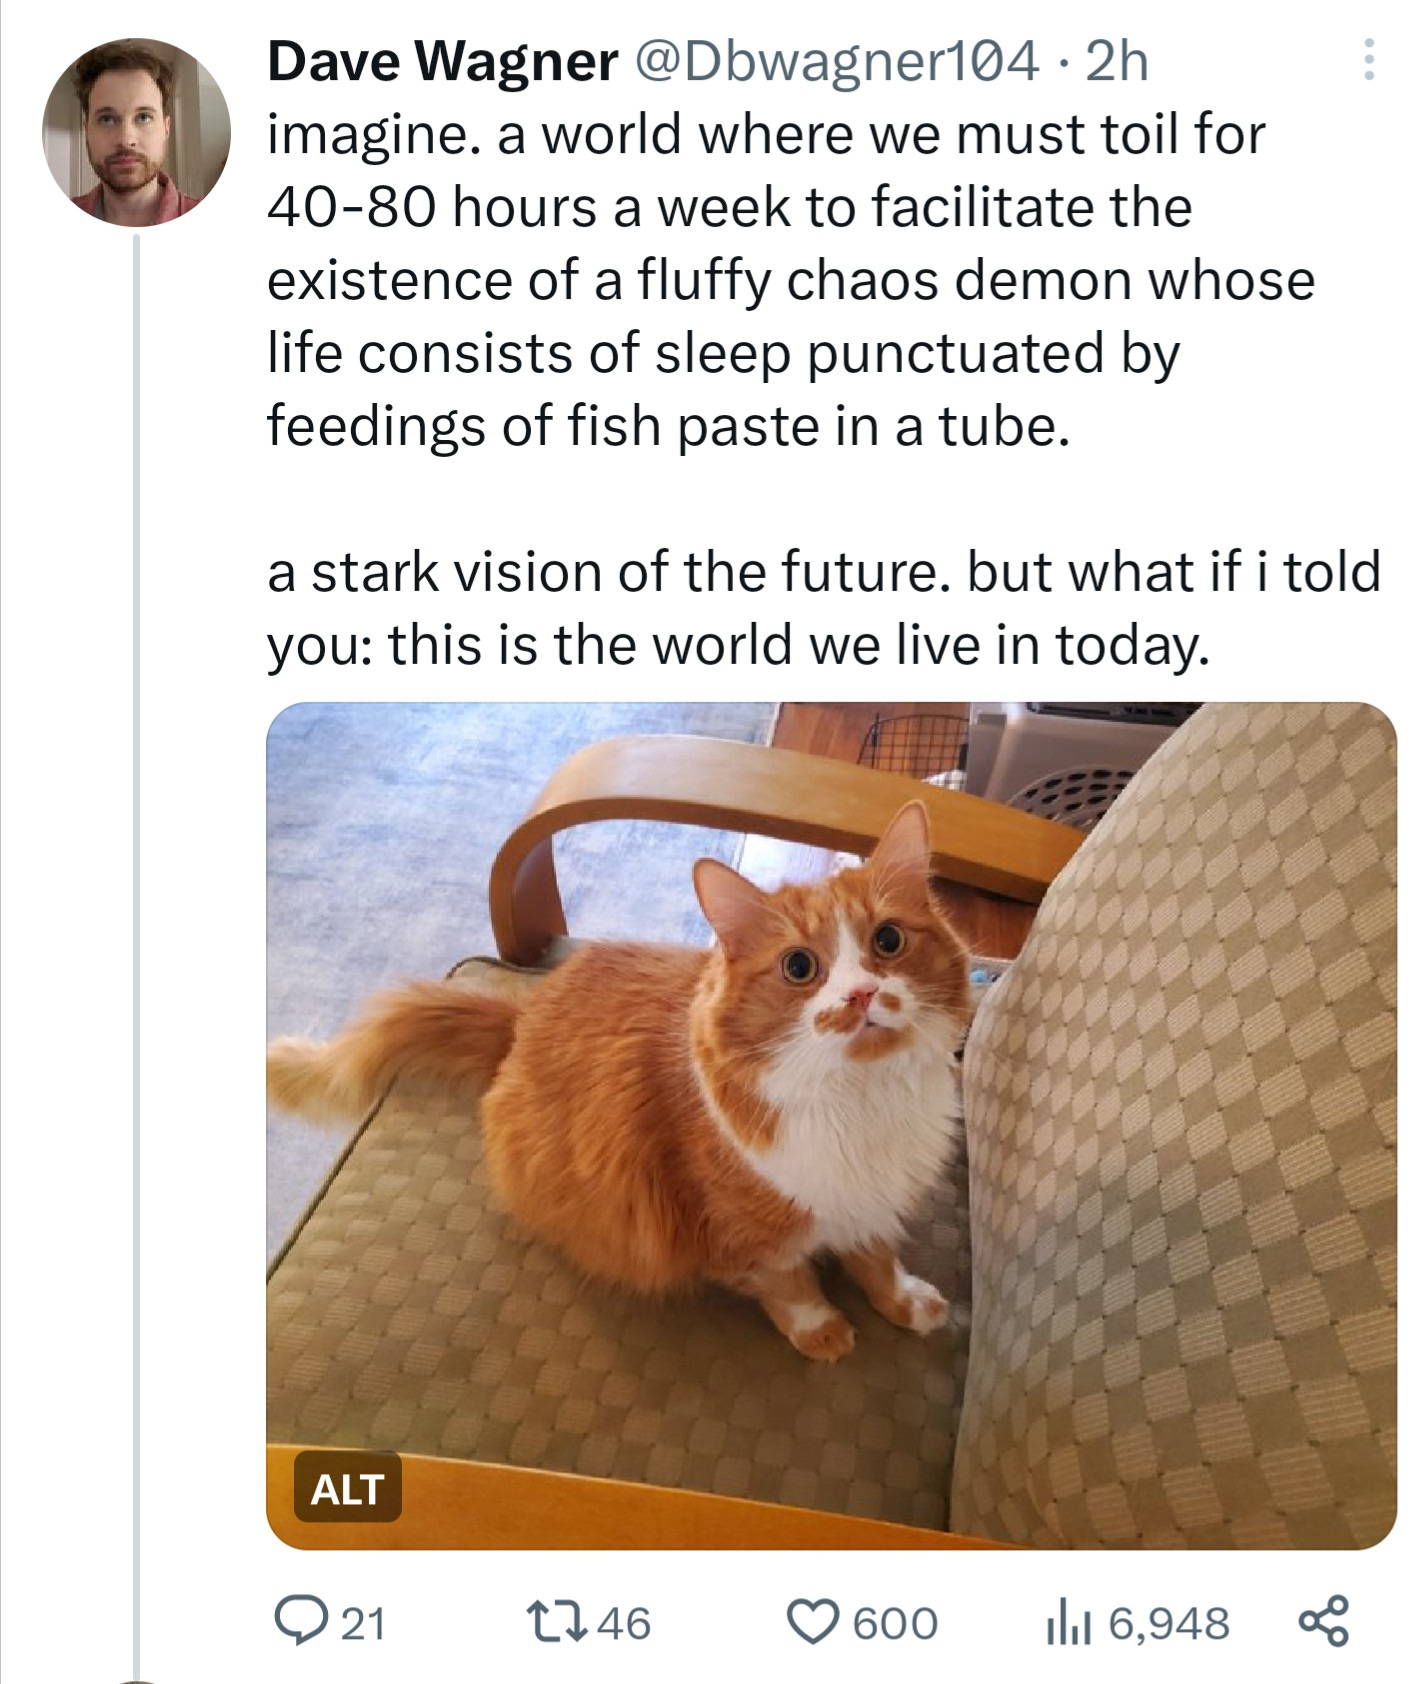 A tweet by @dbwagner104: imagine. a world where we must toil for 40-80 hours a week to facilitate the existence of a fluffy chaos demon whose life consists of sleep punctuated by feedings of fish paste in a tube. a stark vision of the future. but what if I told you: this is hte world we live in today. Under the tweet is an orange and white cat looking up at the camera.